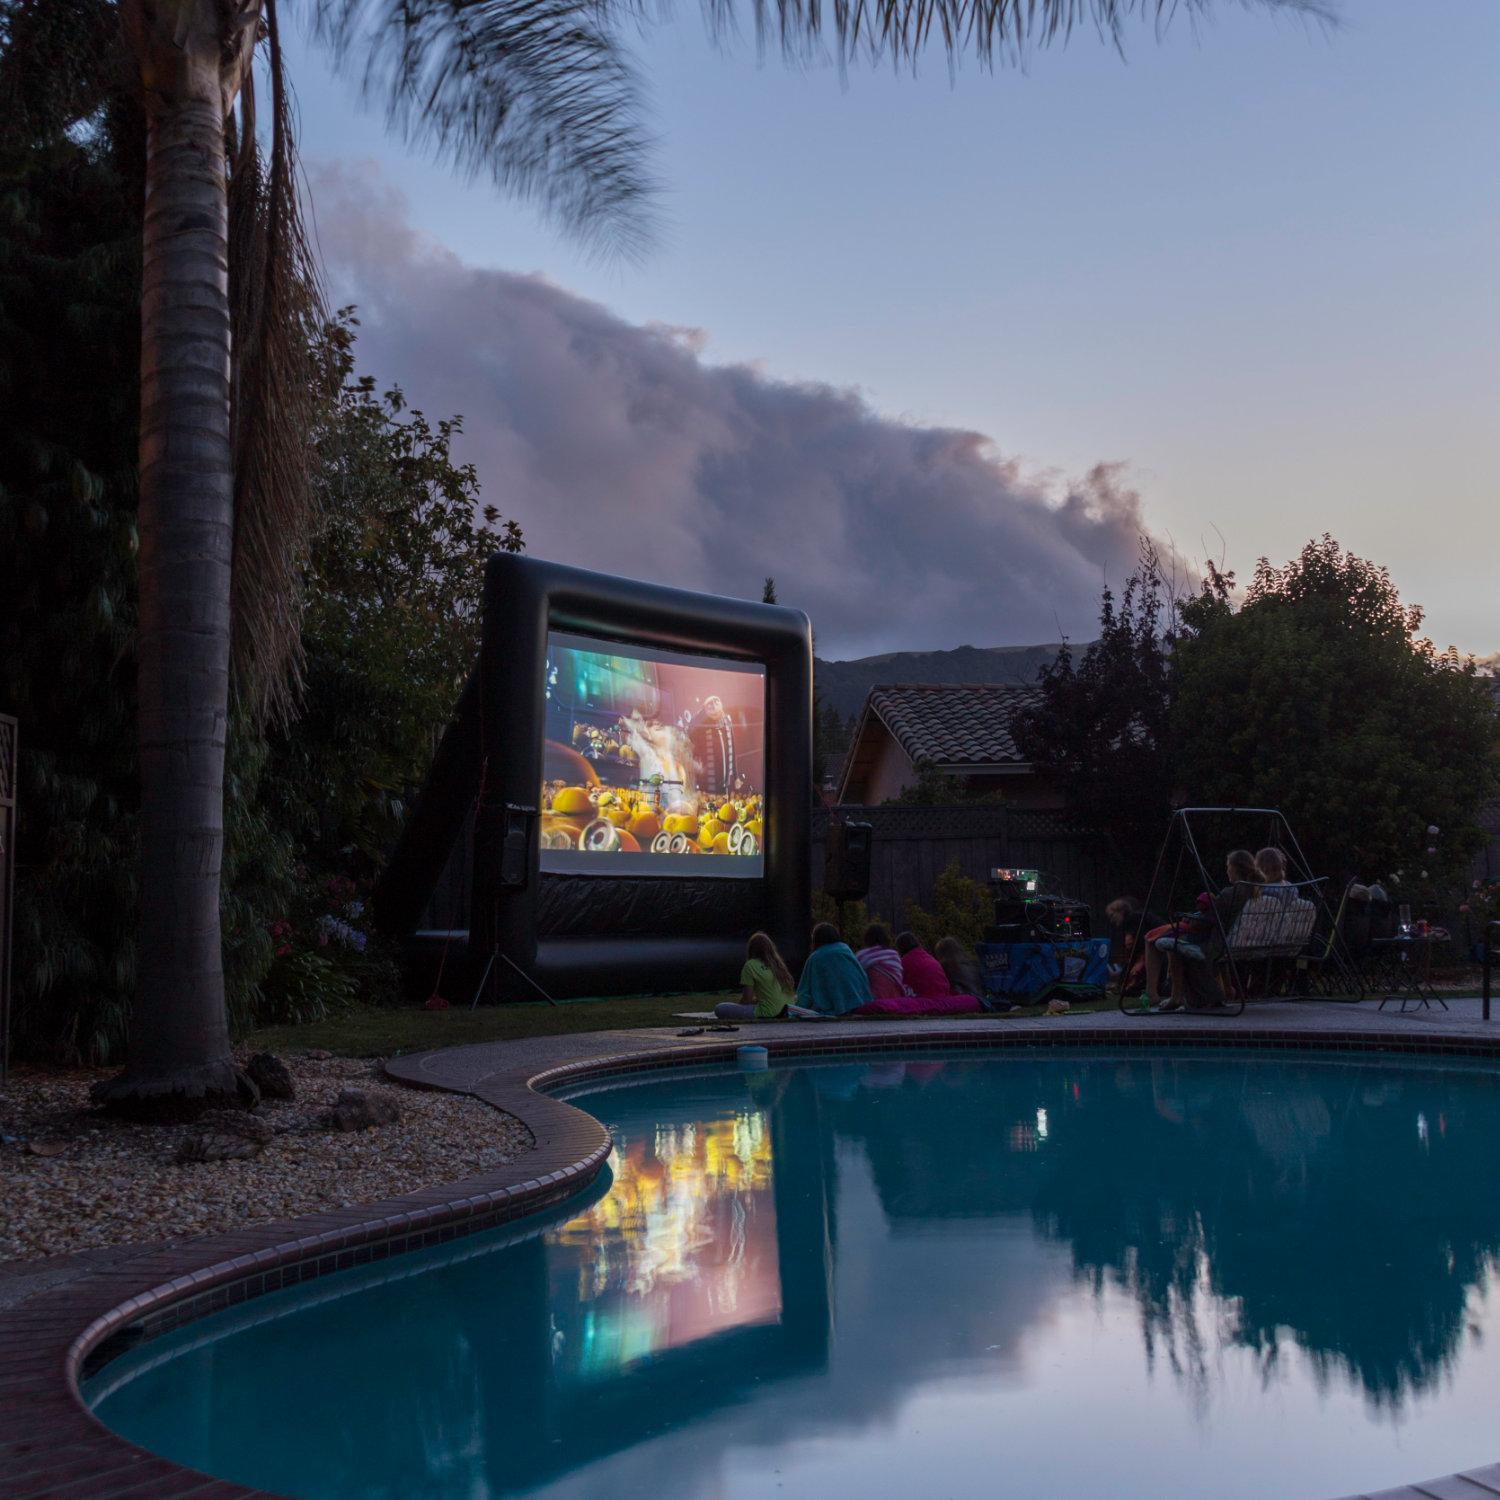 Kids watching a movie on a FunFlicks inflatable screen by the backyard pool.